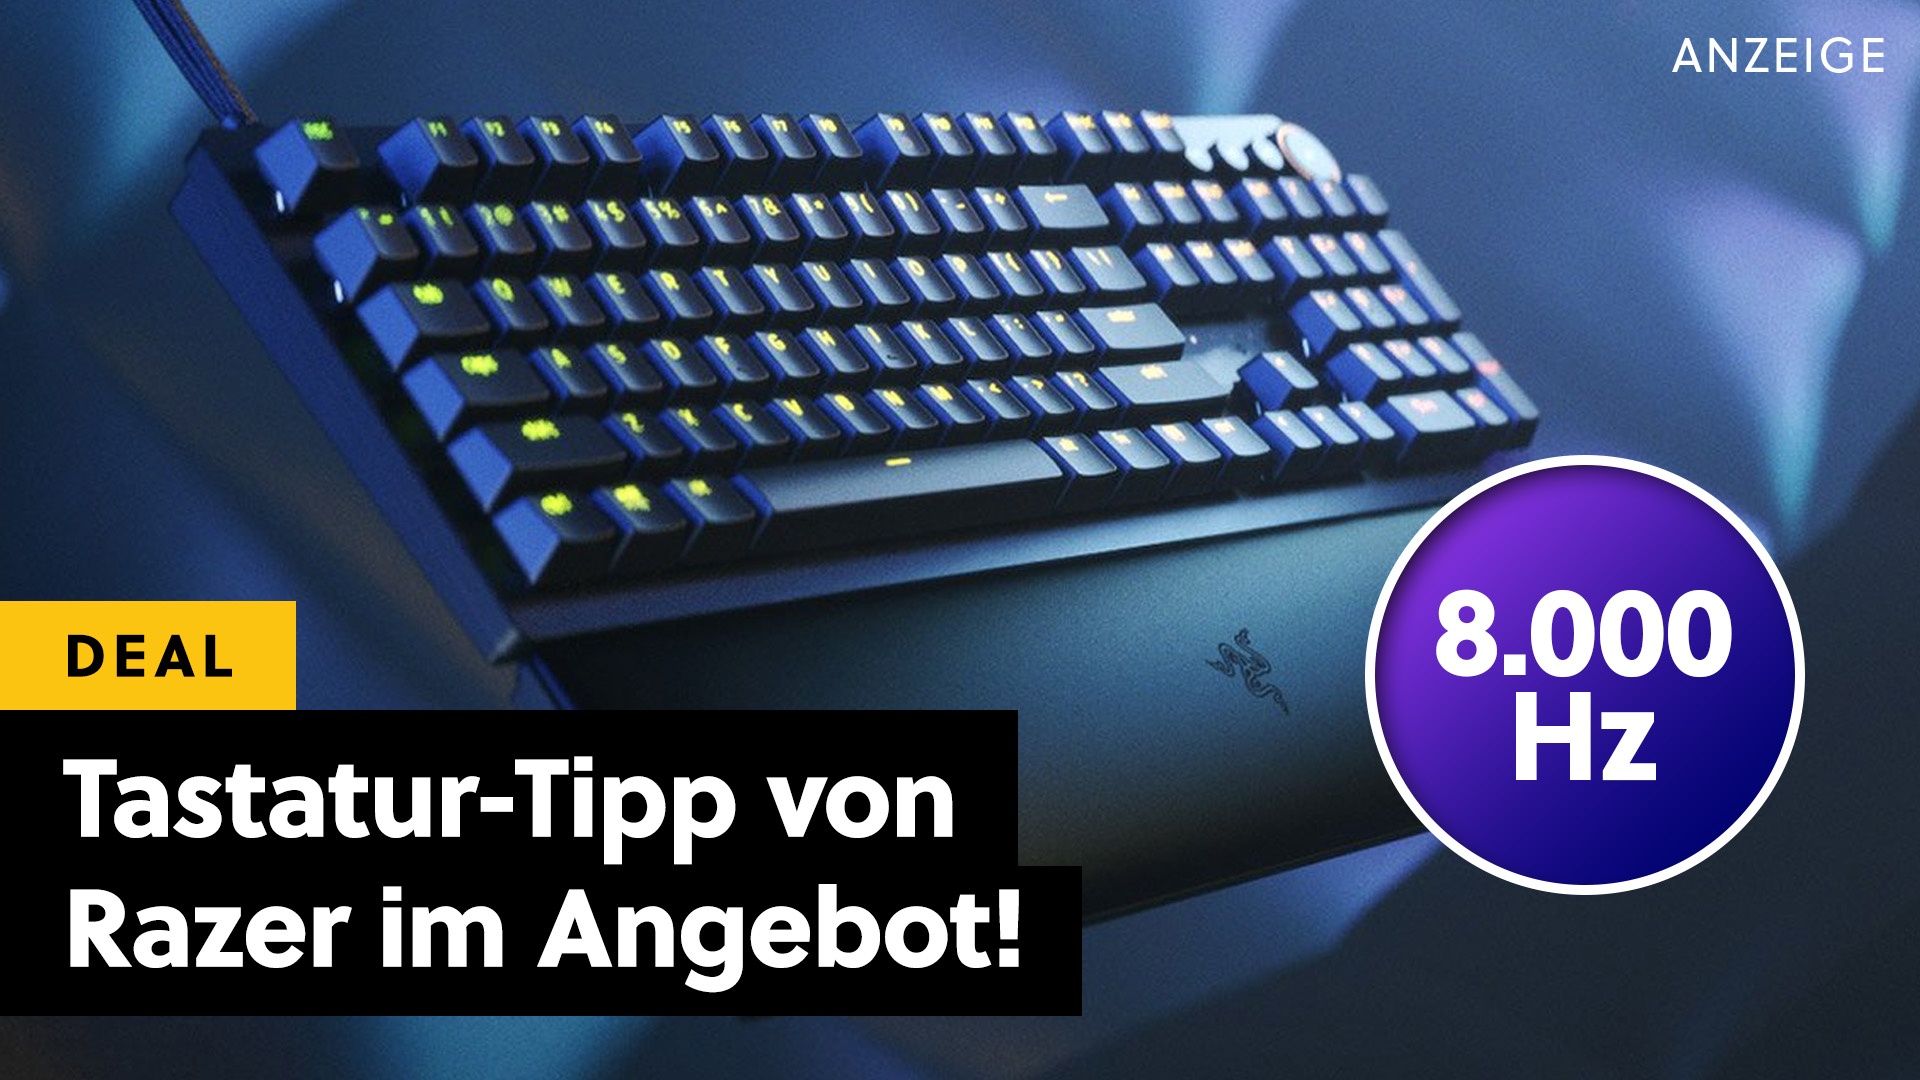 The only people you bother with this optical gaming keyboard are your opponents!